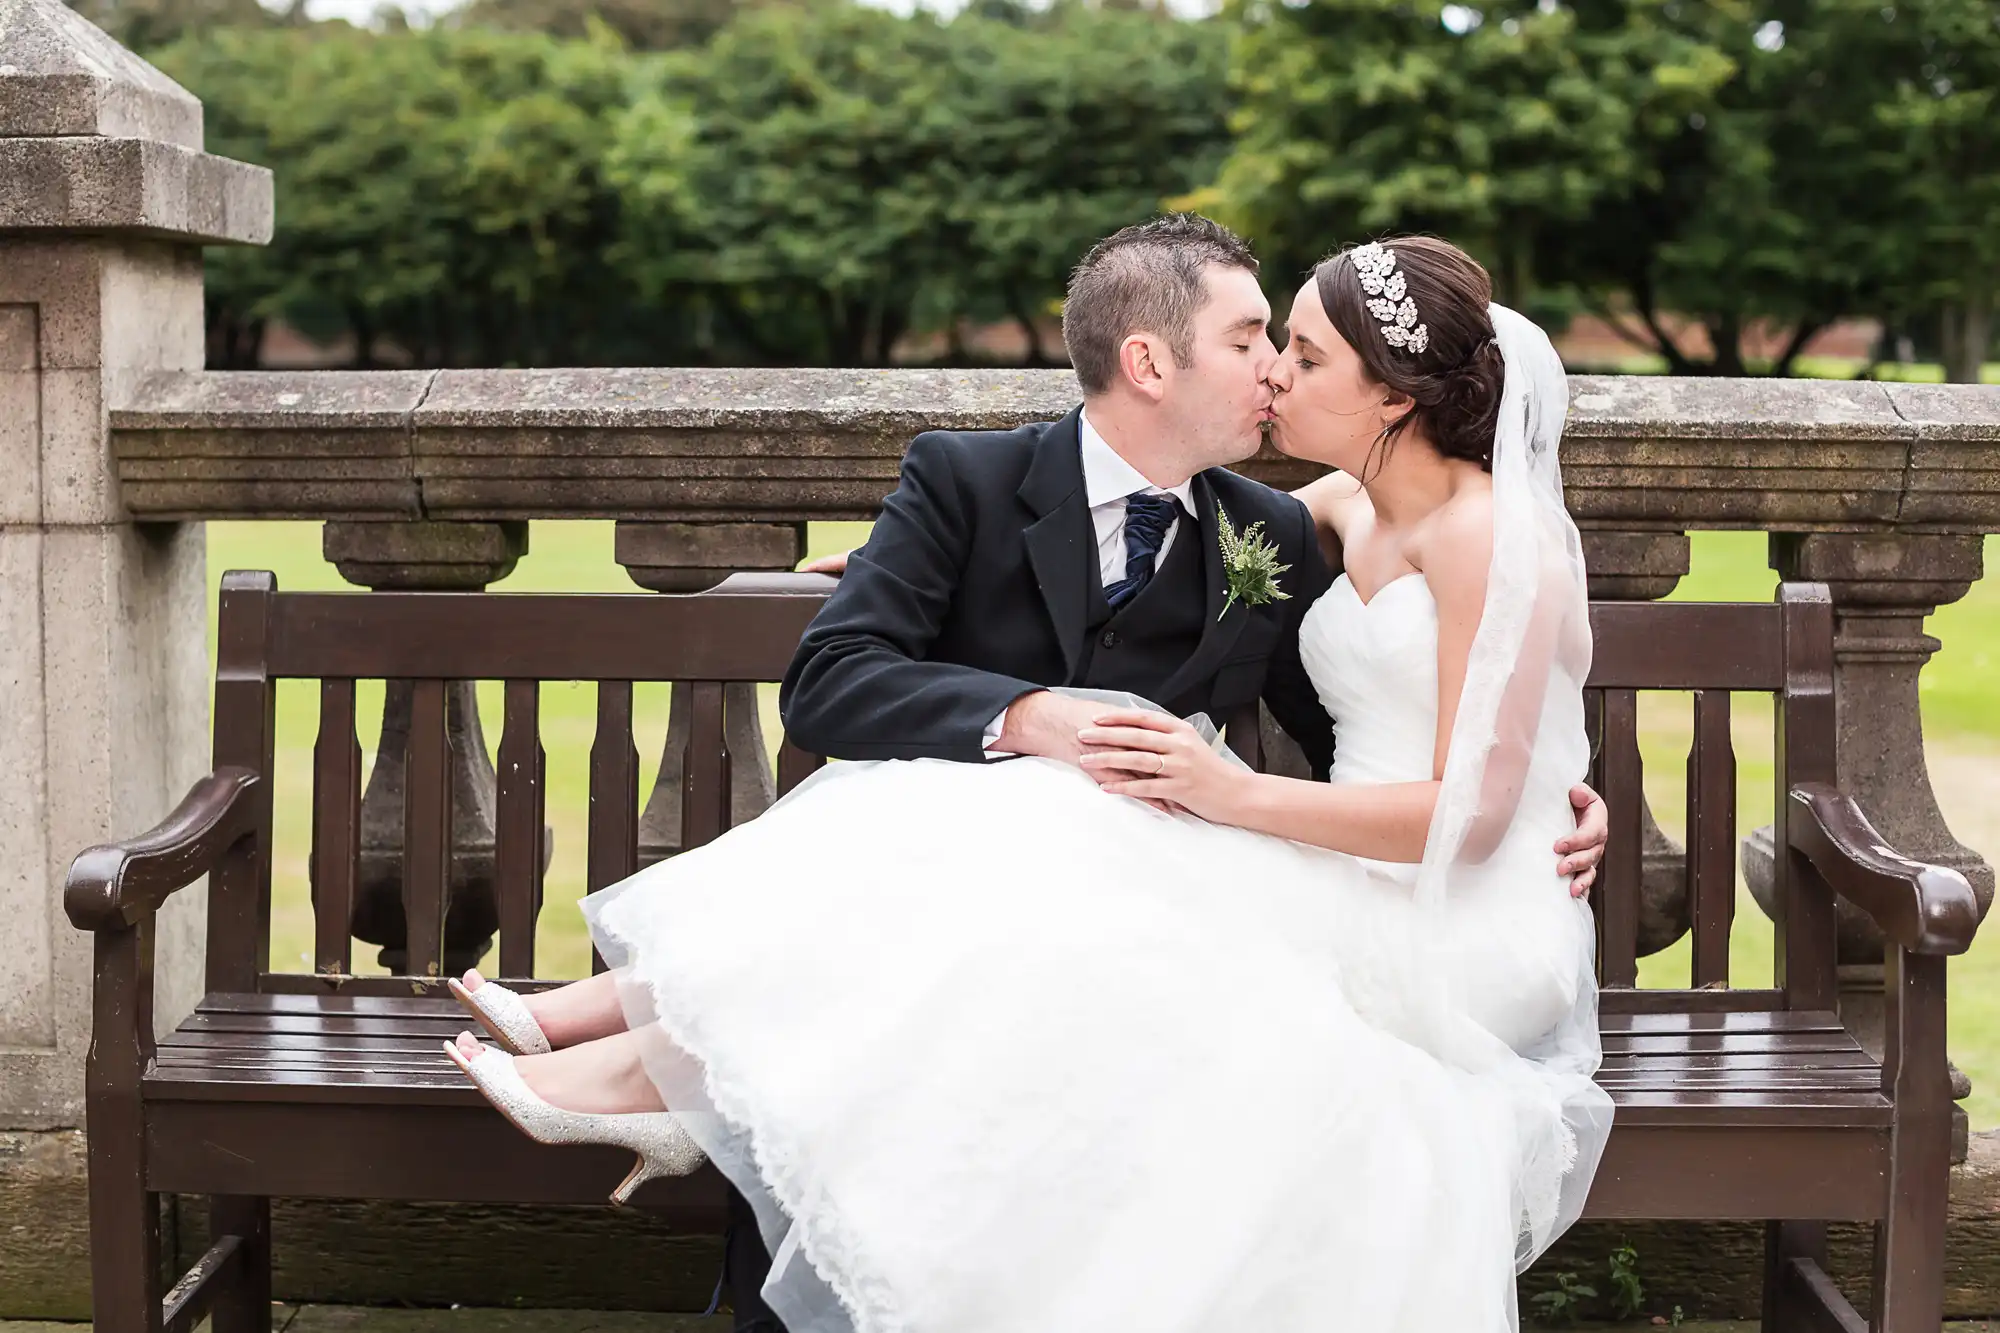 A bride in a white gown and a groom in a black suit kissing on a park bench, with trees in the background.